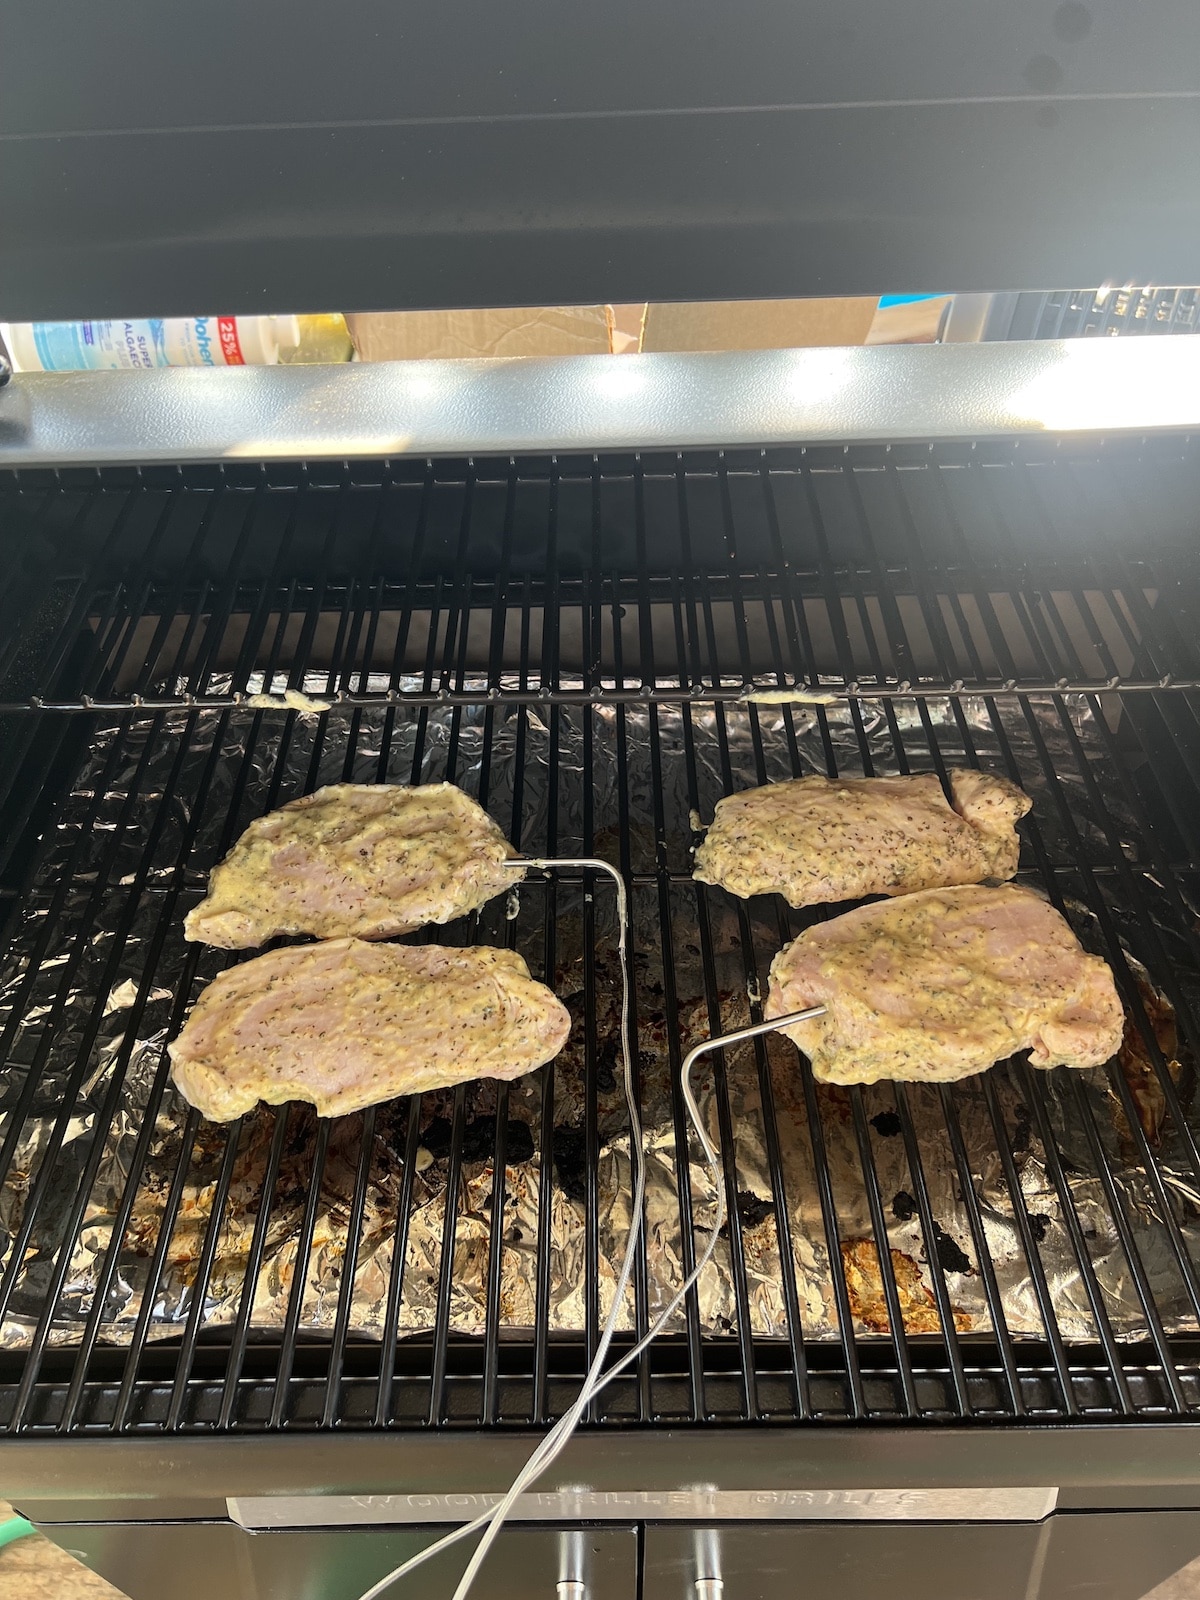 4 pork chops on a grill with meat probes.